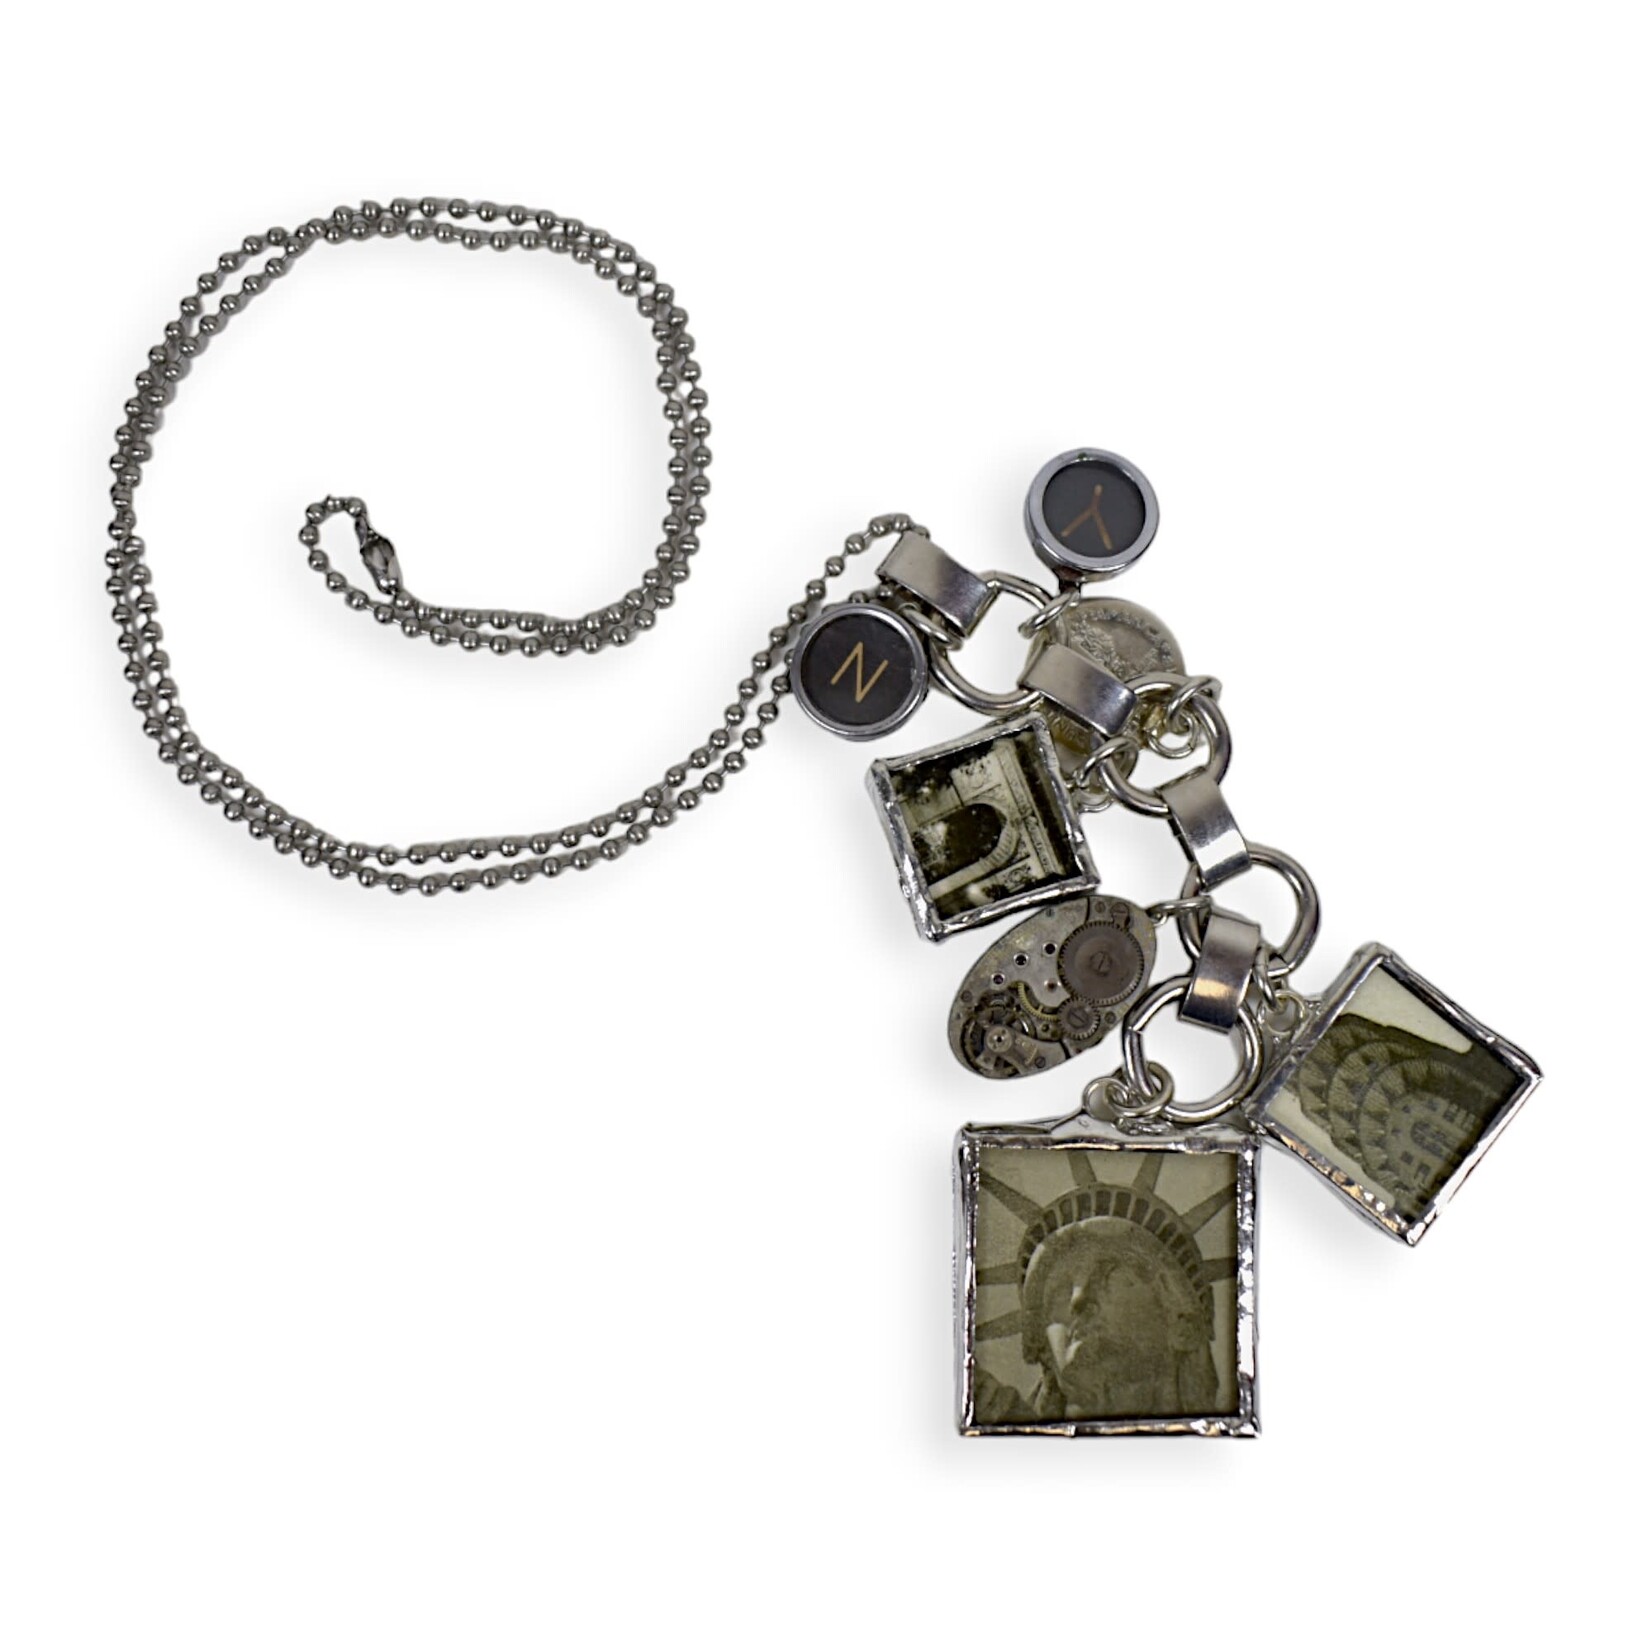 Hilary Greif Designs NYC Charms Necklace